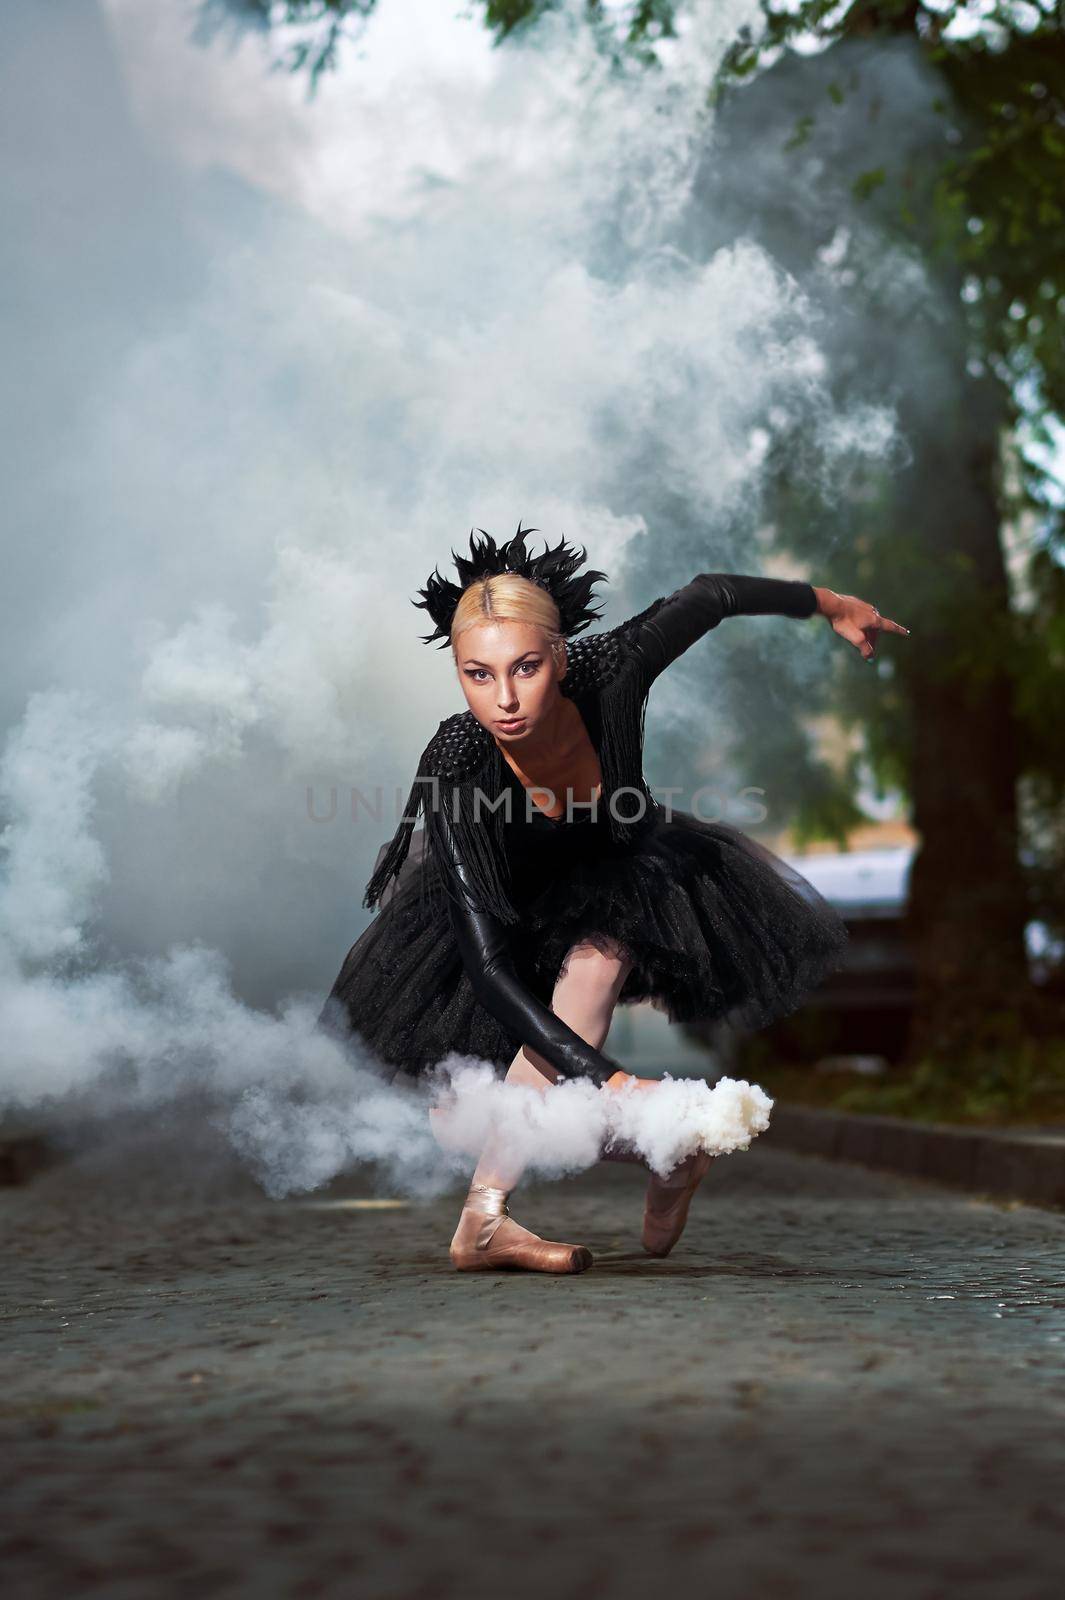 Vertical shot of a black swan ballerina dancing in the smoke on the city streets.